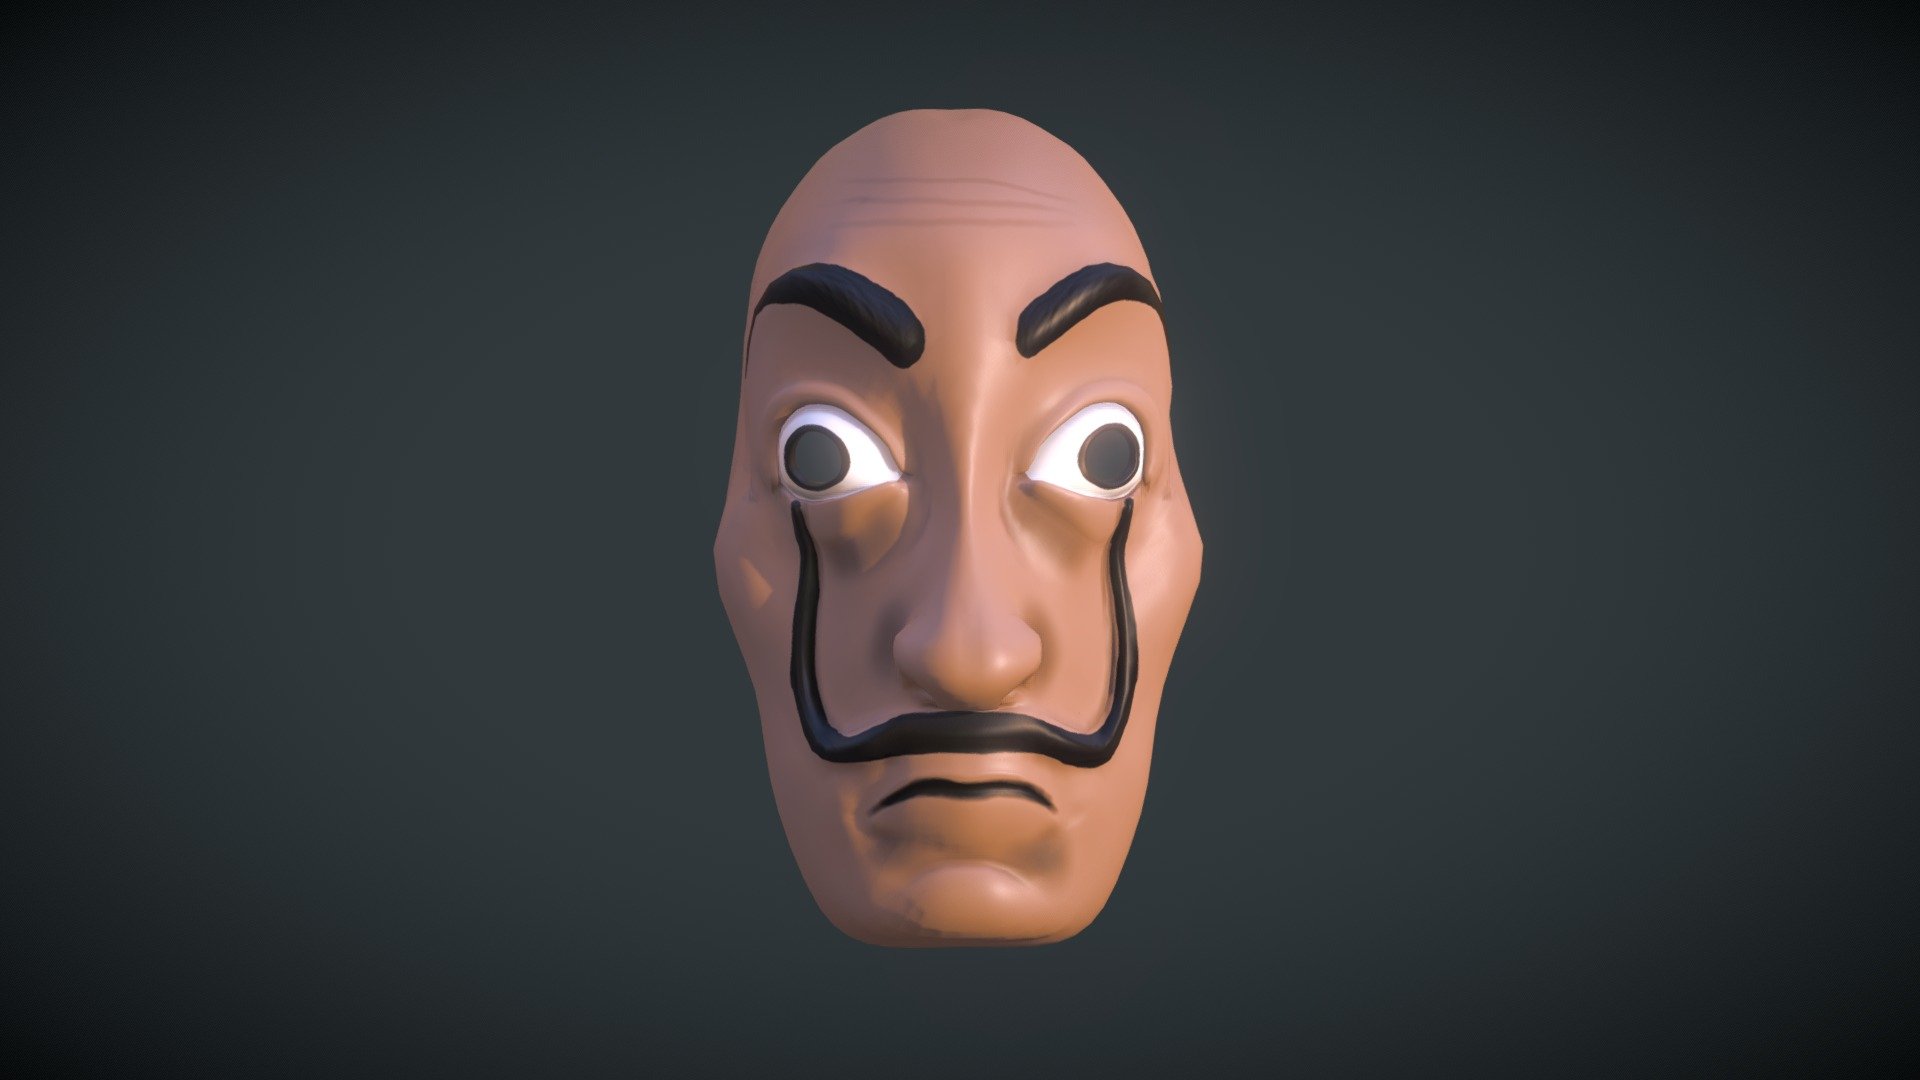 We made a cool game arround money heist tv show concept. So I decide to do some models to render for game ui background and intro. This dali mask is one of those 3d models. Hope you like it. don't forget to fav and share it with your friends please :).

Main PBR fully customizable Mask. VR and mobile ready asset with a high attention for details (Low poly and highpoly).

This model took 9 hours of work.
High poly, Low Poly, Painted Textures, and ready for Unity/Unreal Engine.

It comes with three 4K Textures.
Unity Metallic: Albedo/Transp, Normal, Metallic/Smooth

The mask is ready for any kind of animation.

General Information: This Mask is best used for all platform 3d model